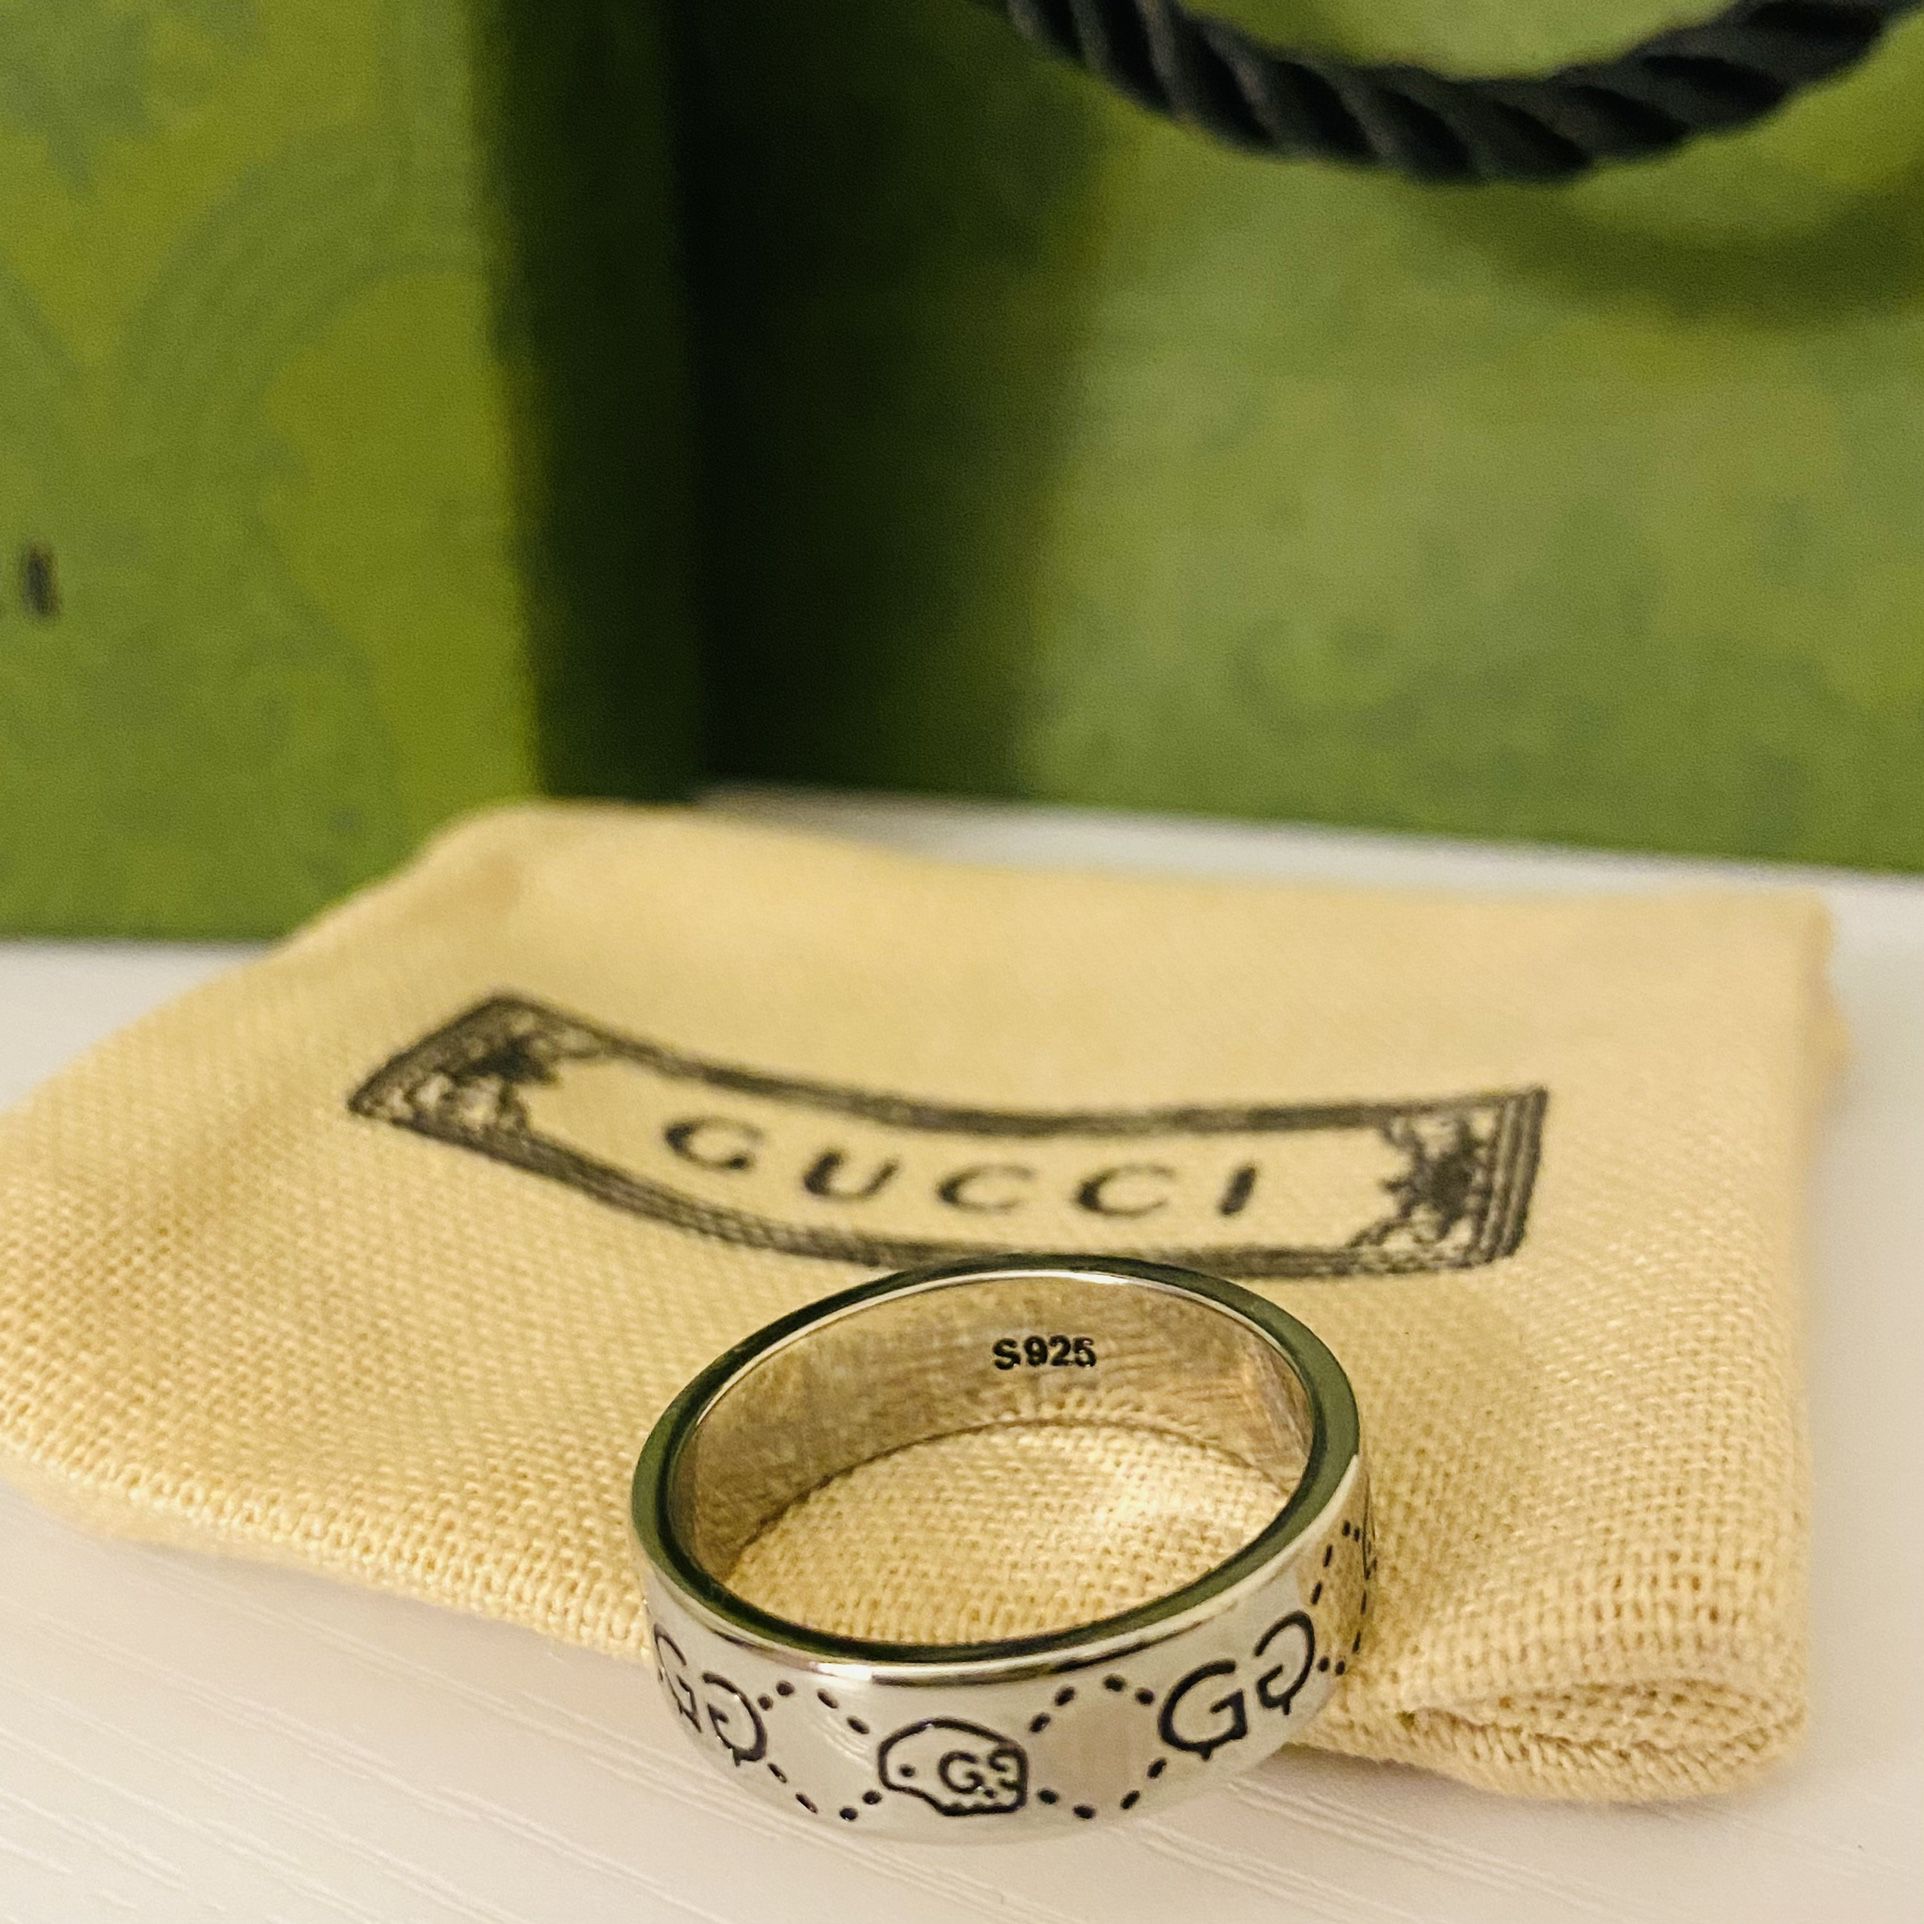 Gucci Double G Ghost Ring US Size 9